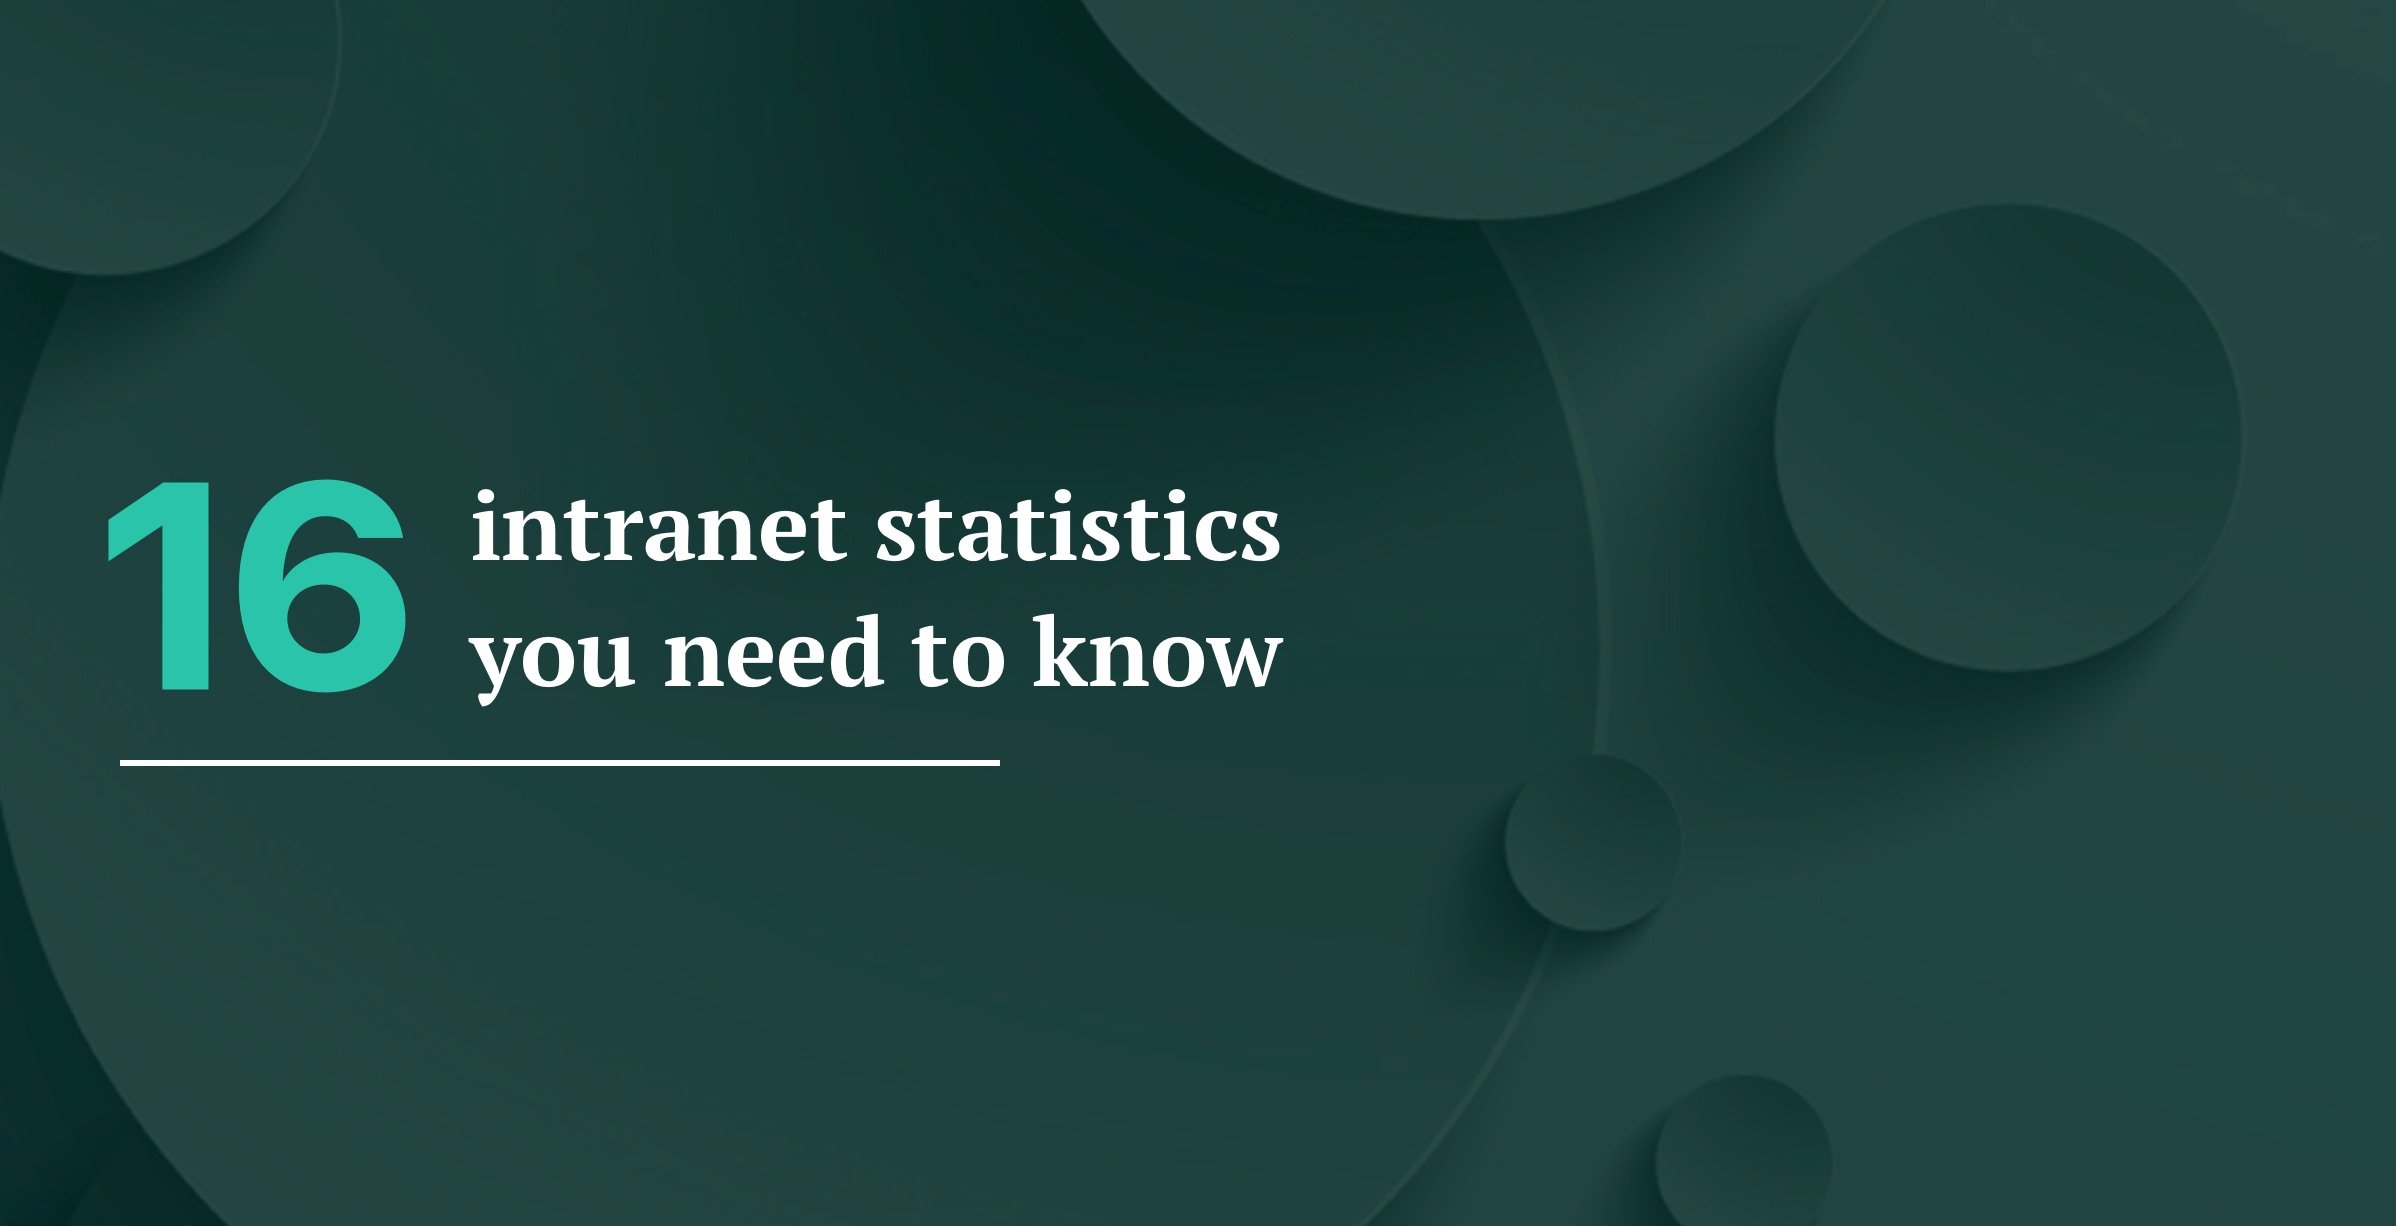 16 intranet statistics you need to know in 2022